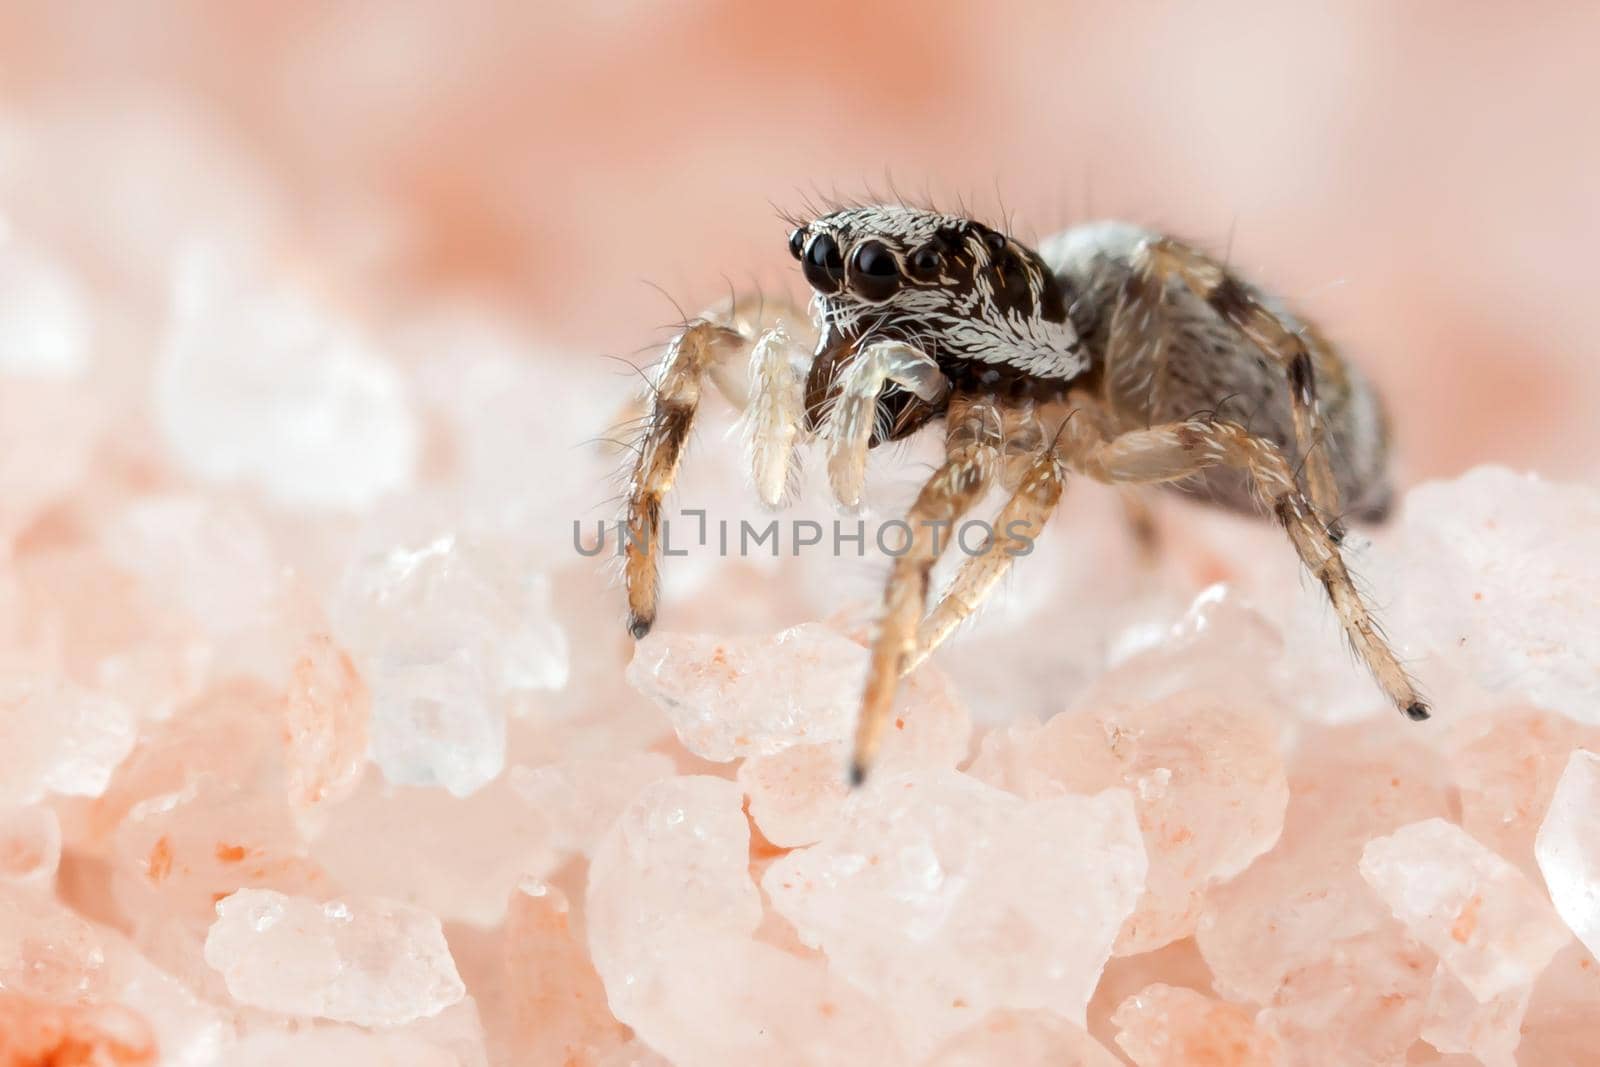 Jumping spider on the pink Himalayan salt crystals